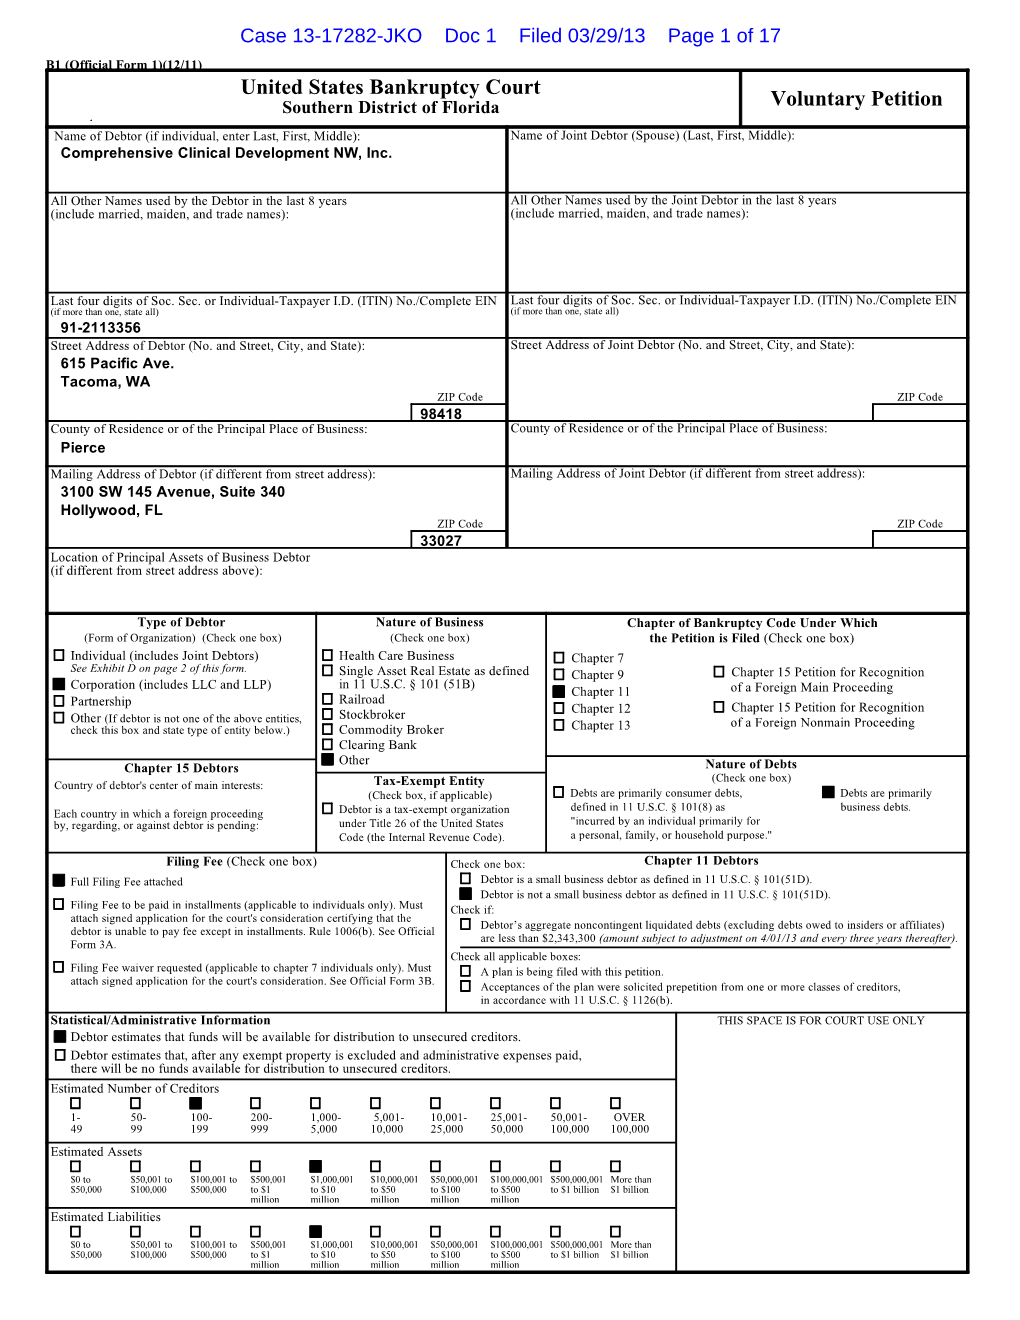 13-17282-JKO Doc 1 Filed 03/29/13 Page 1 of 17 B1 (Official Form 1)(12/11) United States Bankruptcy Court Southern District of Florida Voluntary Petition